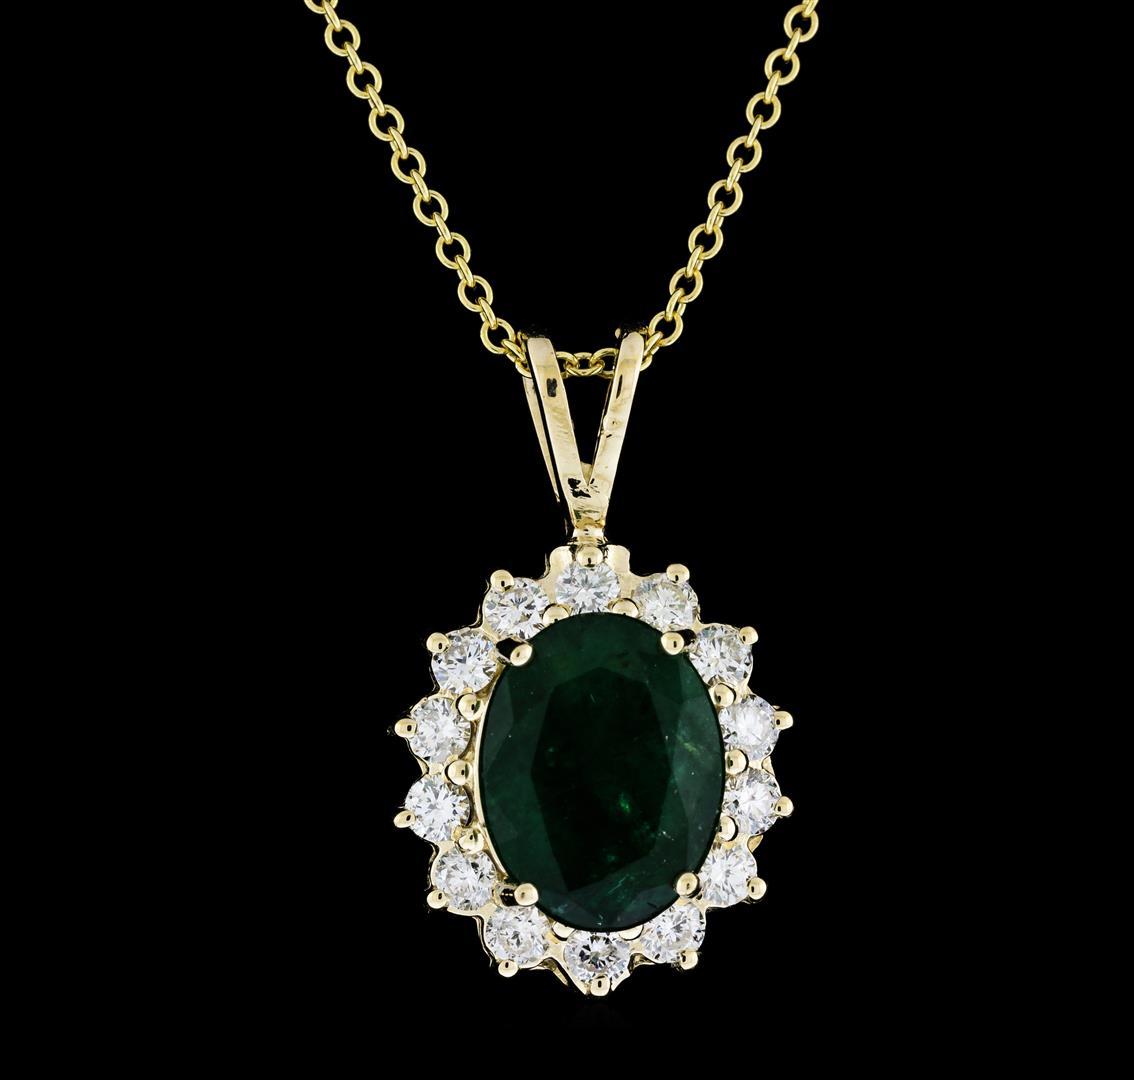 3.77 ctw Emerald and Diamond Pendant With Chain - 14KT Yellow Gold